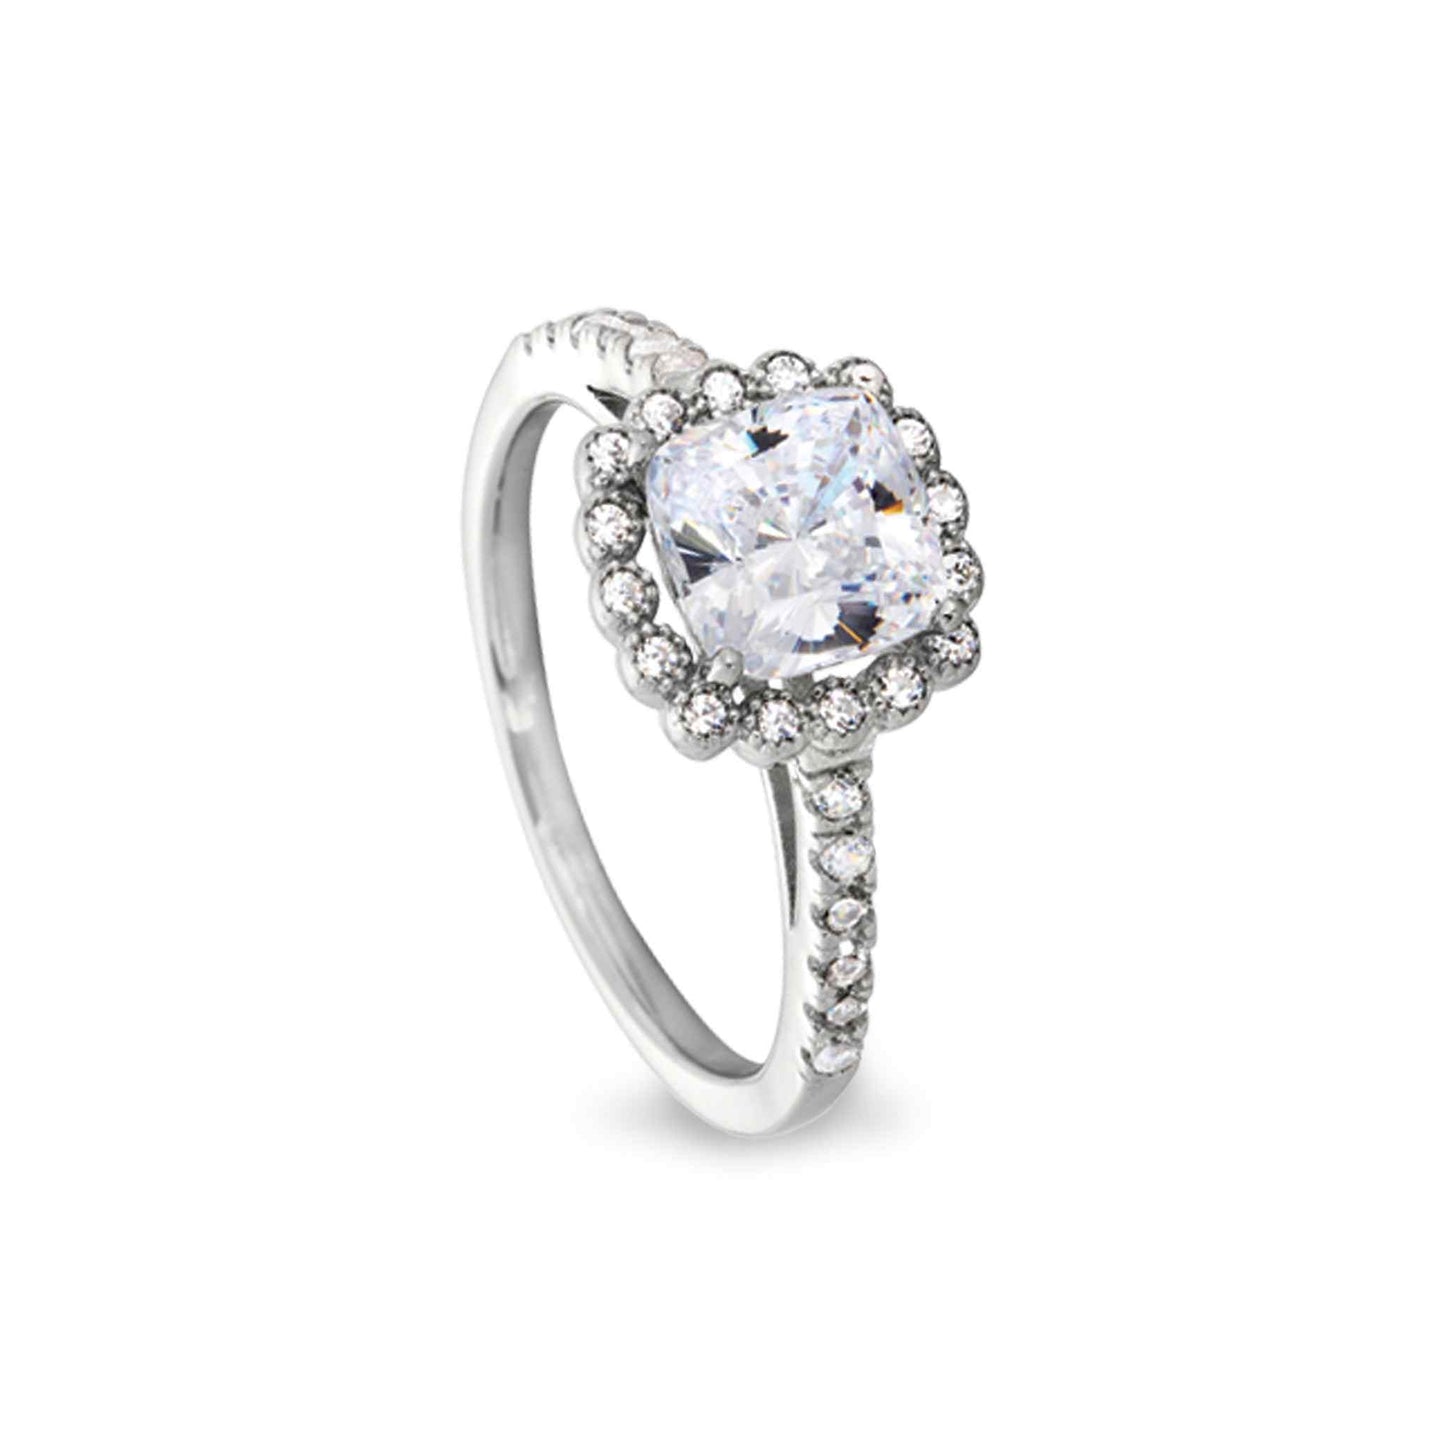 A cushion cut ring with 28 simulated diamonds displayed on a neutral white background.